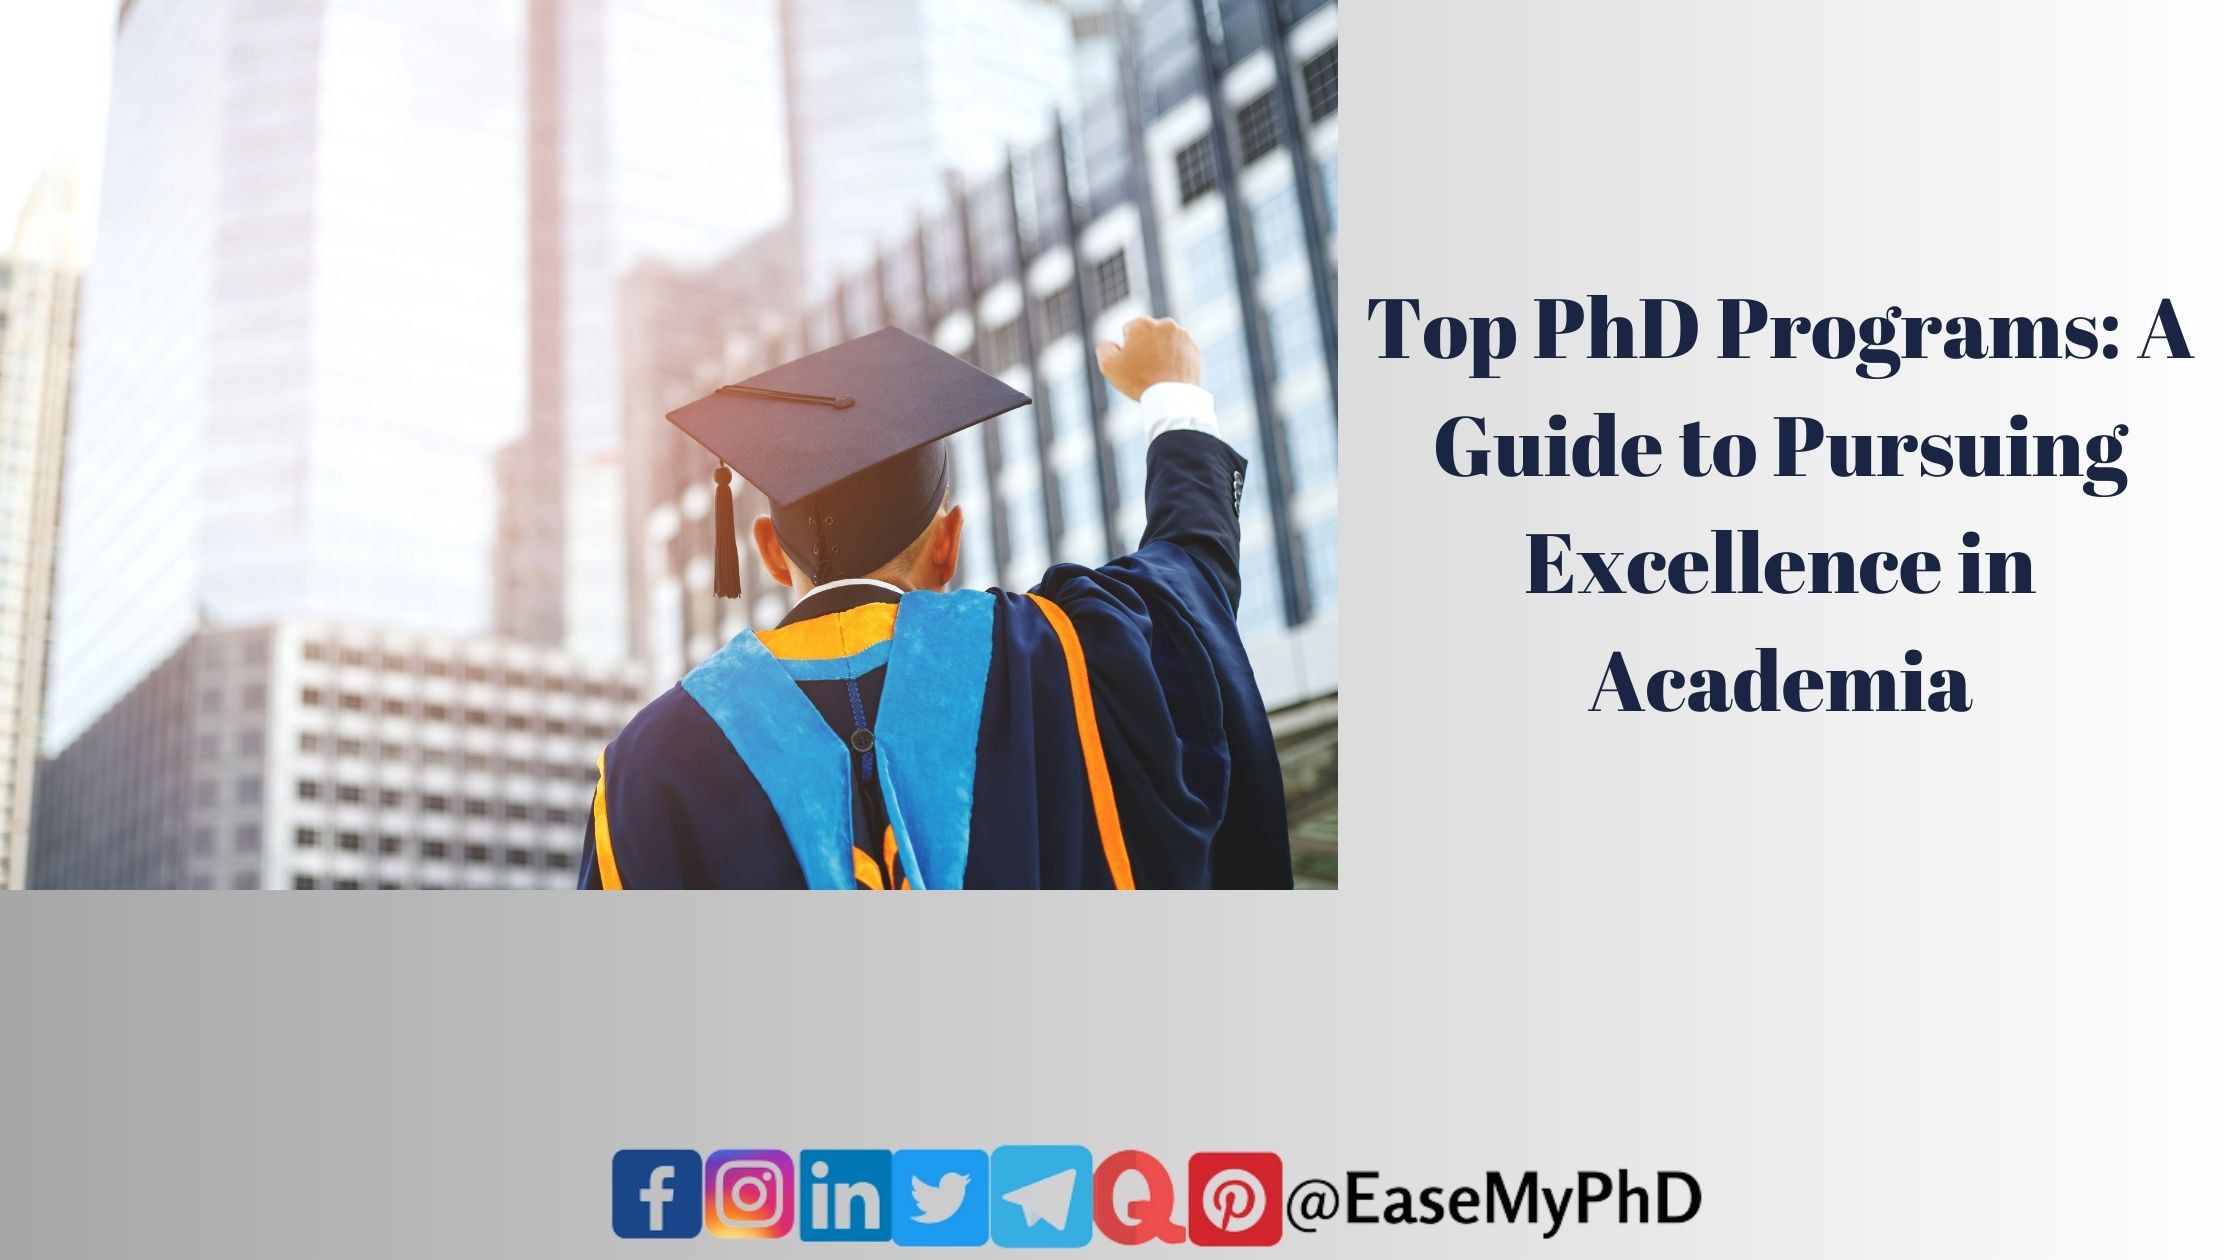 which subject is best for phd in india fully funded english phd programs upgrad phd fees best english phd programs in the world english literature phd programs which subject is best for phd in science which subject is best for phd in arts best online english phd programs